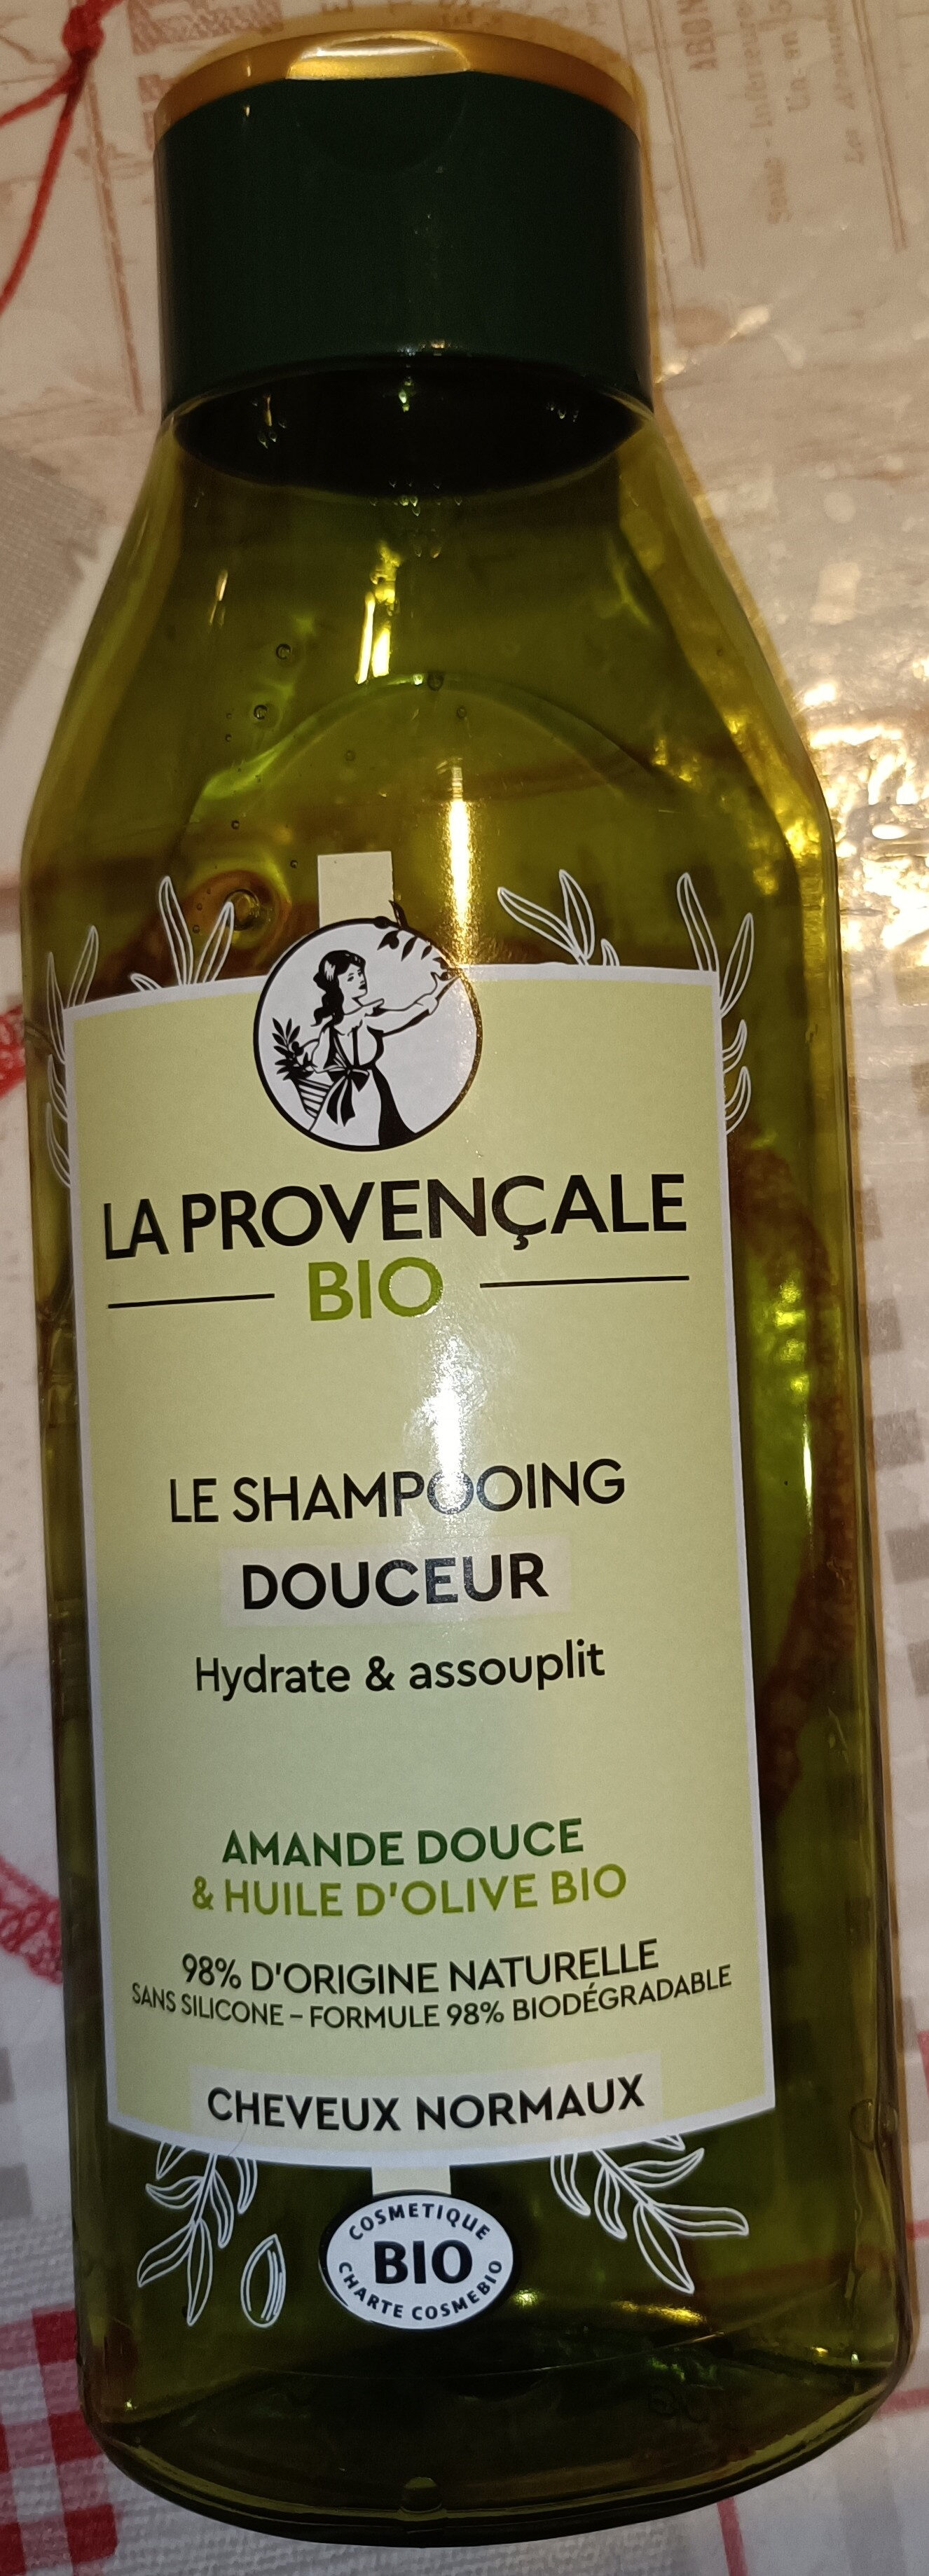 Le shampooing douceur - Tuote - fr